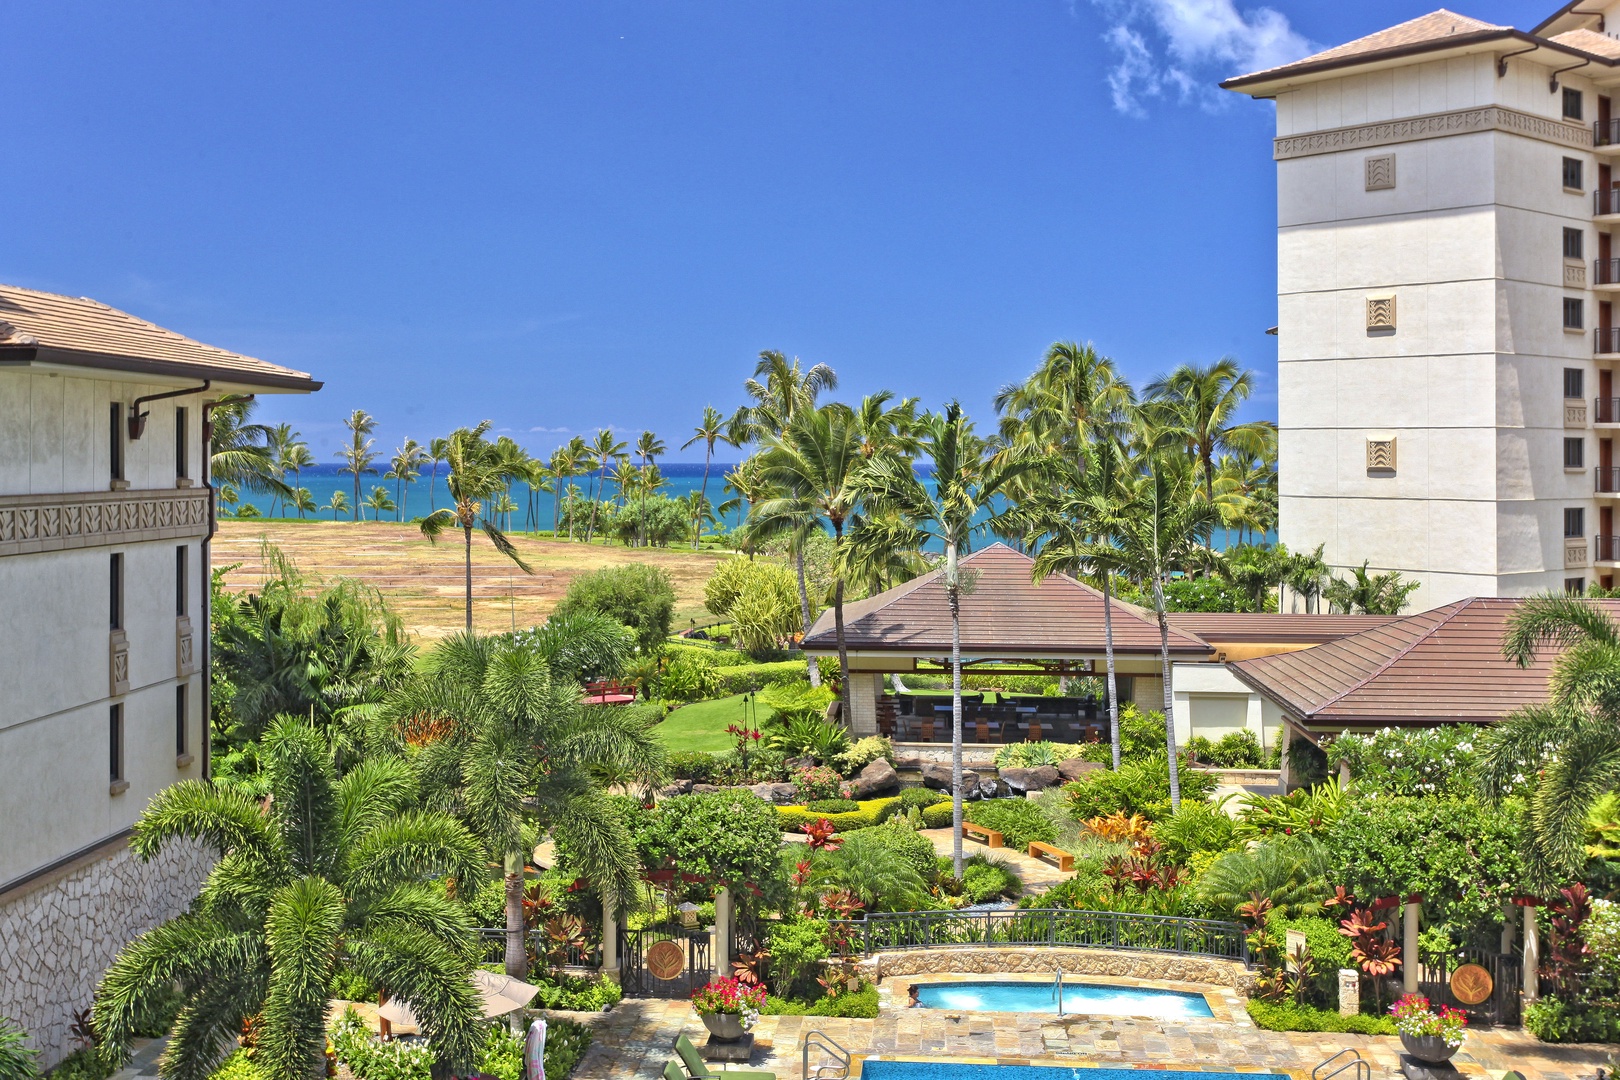 Kapolei Vacation Rentals, Ko Olina Beach Villas O1121 - A view of the resort on a gorgeous island day.